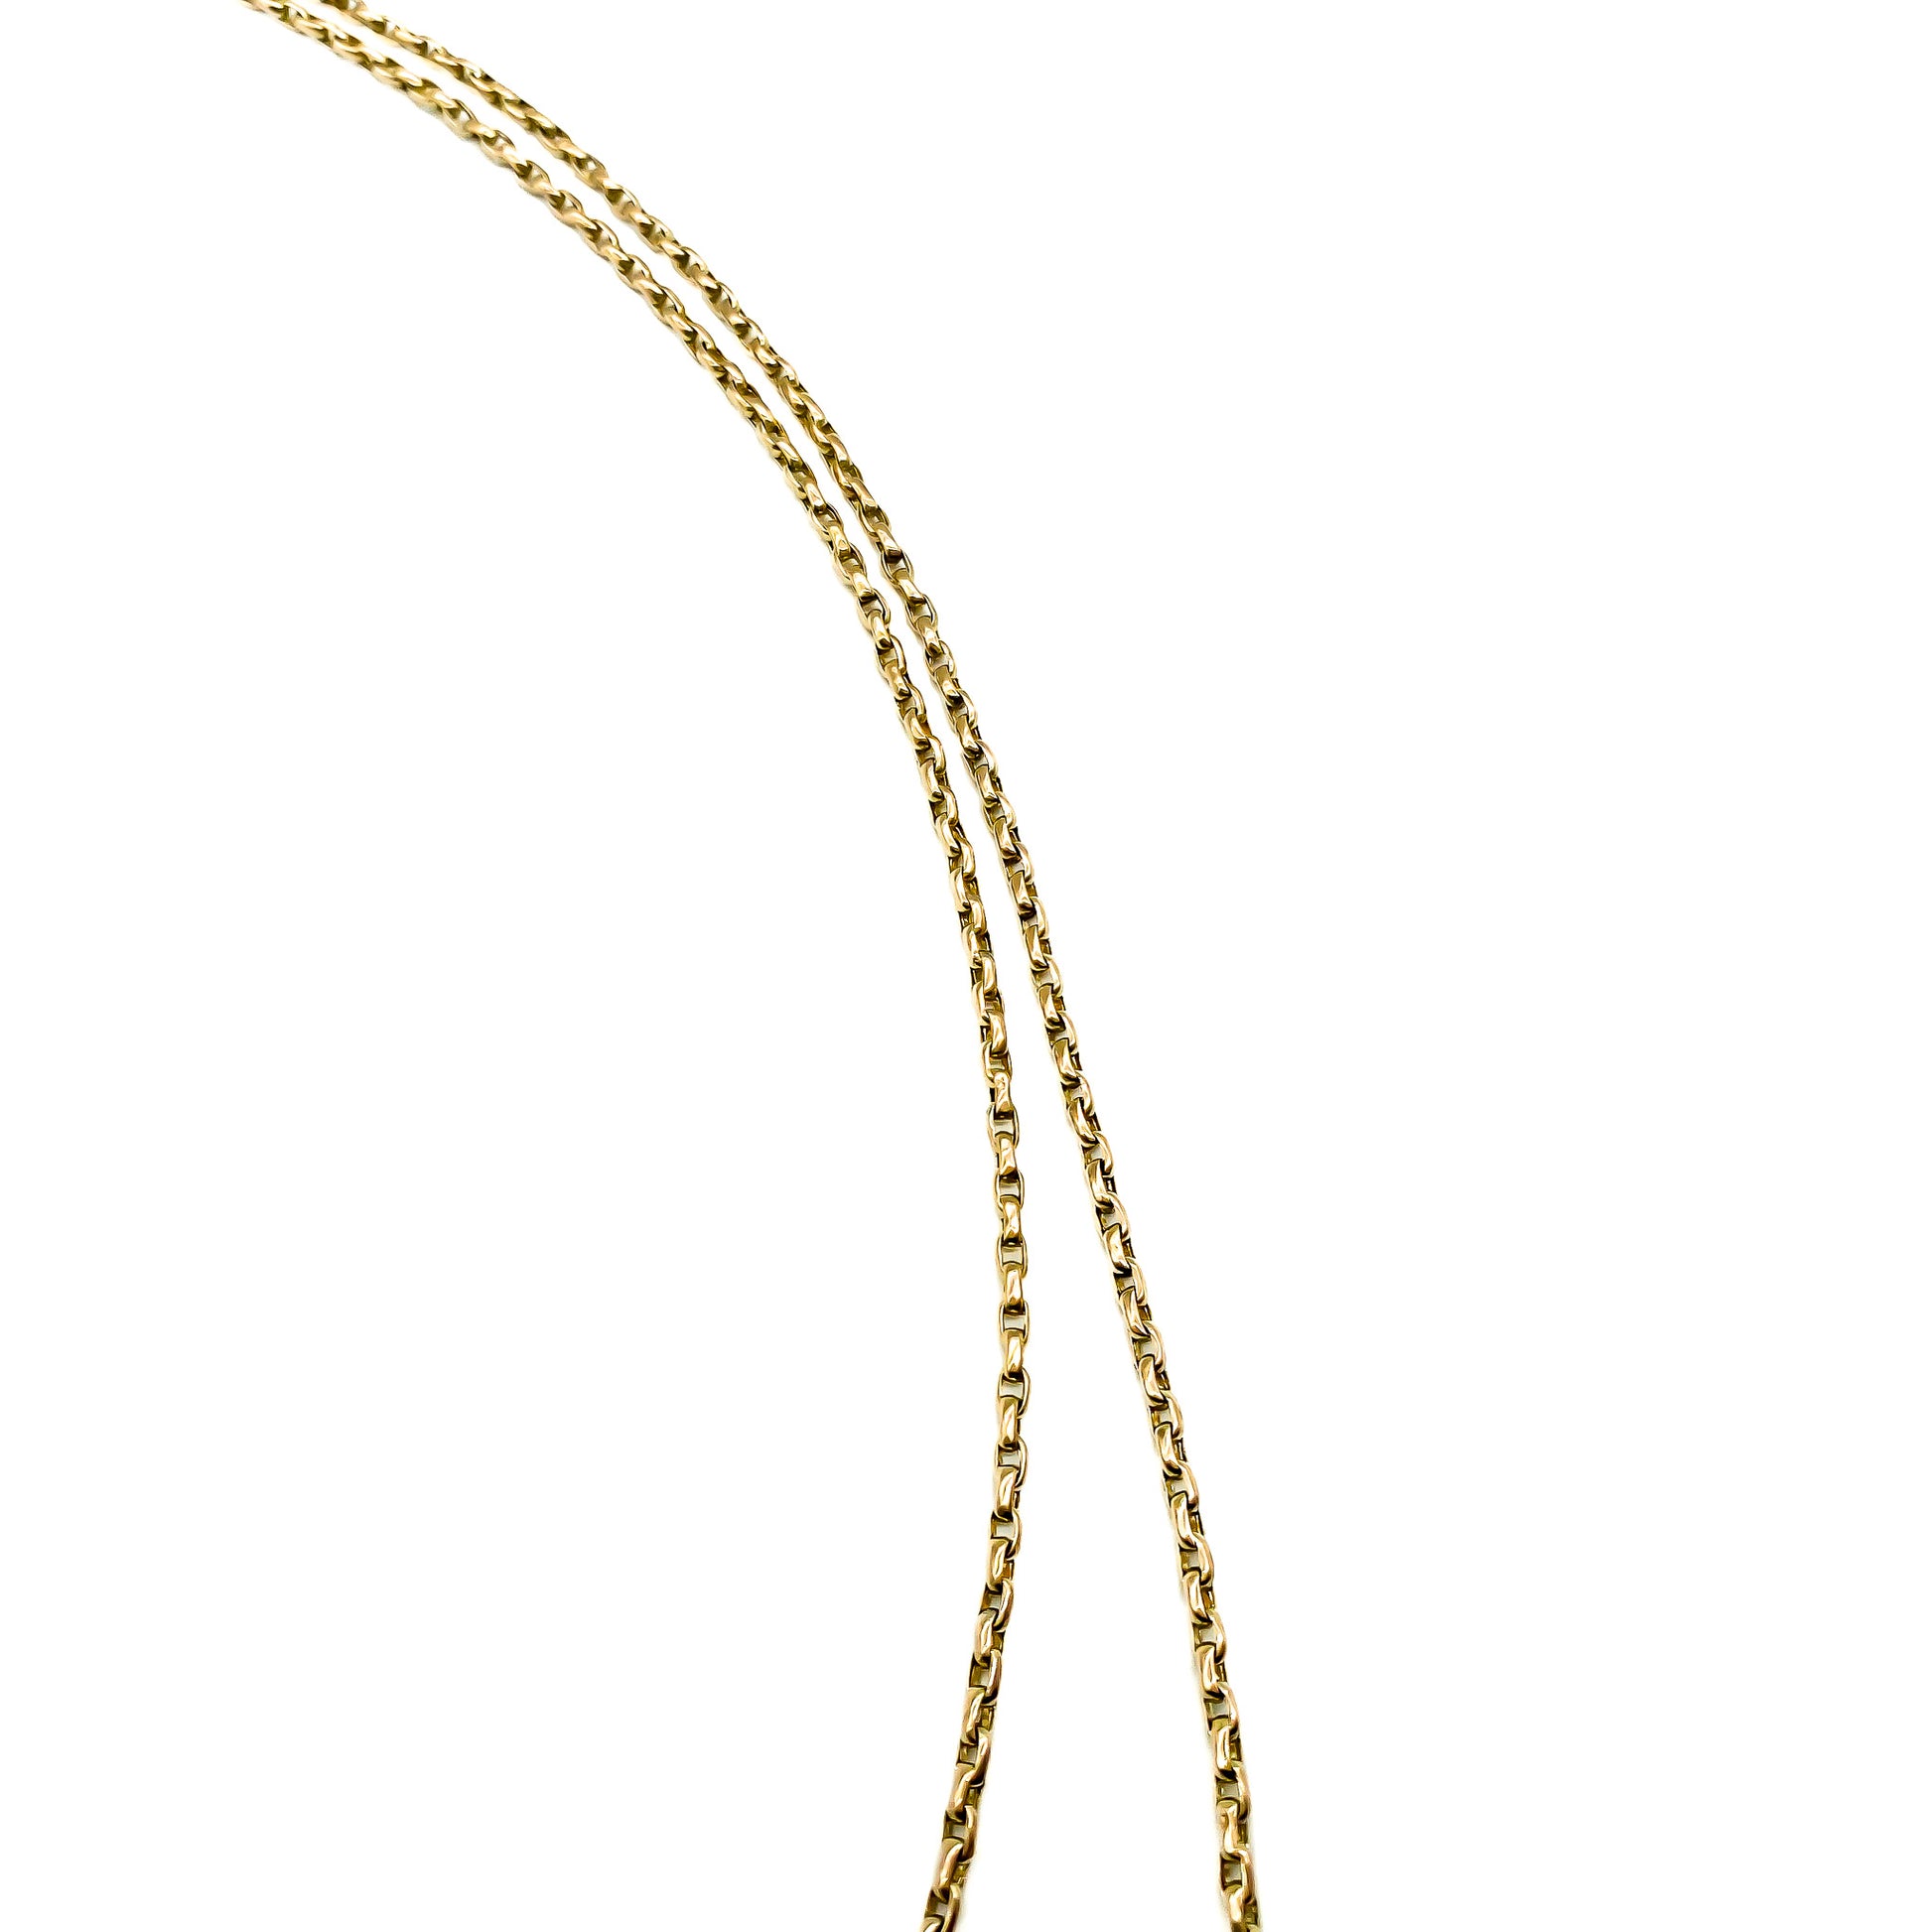 Stylish Victorian 9ct gold box link long guard chain with a dog-clip. Long enough to be draped around the neck two or three times.